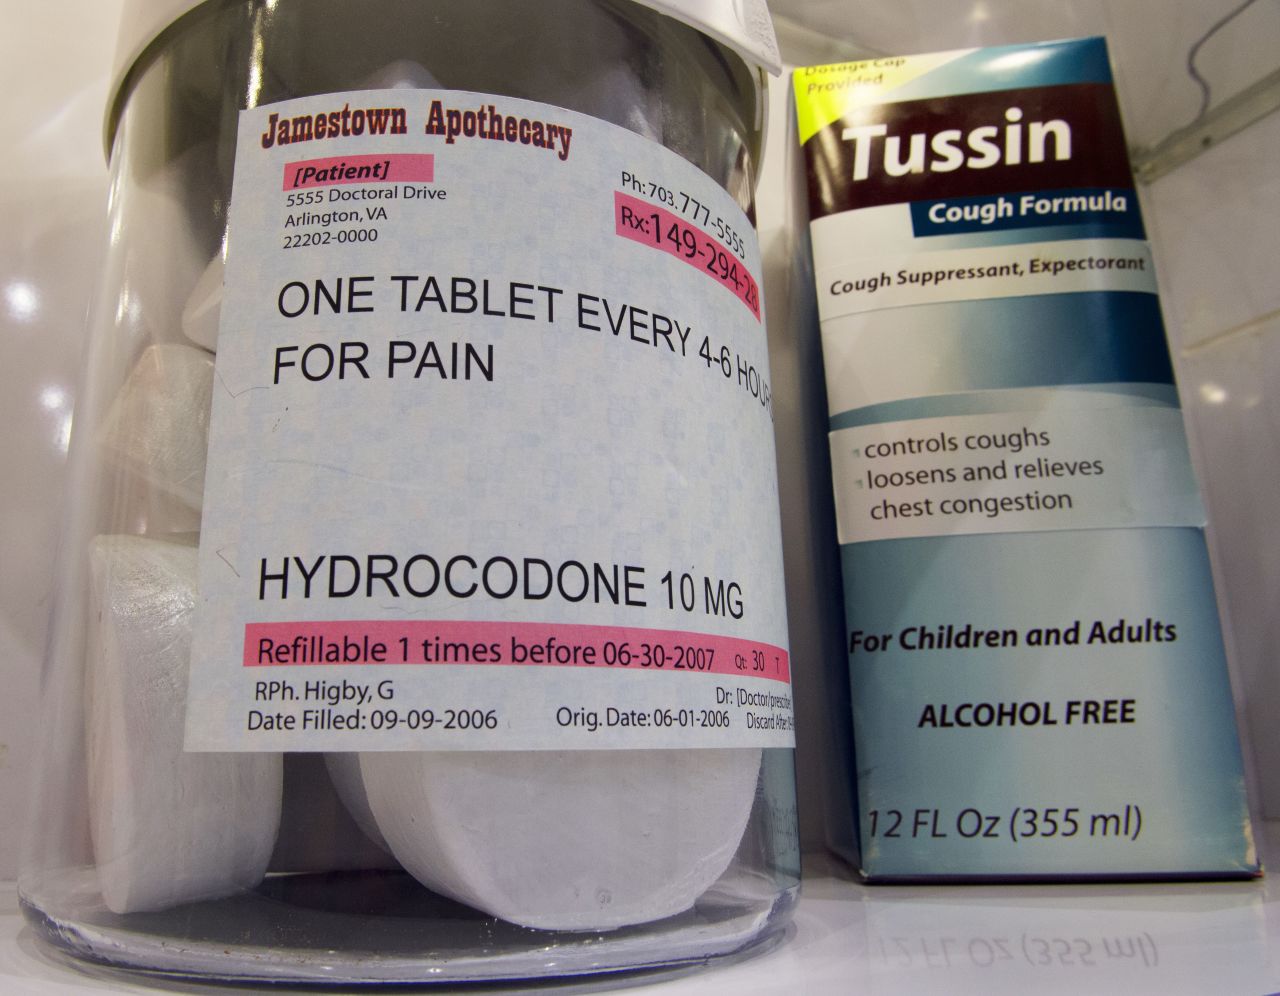 According to the U.S. Food and Drug Administration, hydrocodone (pictured) is the <a href="http://blogs.fda.gov/fdavoice/index.php/2014/10/re-scheduling-prescription-hydrocodone-combination-drug-products-an-important-step-toward-controlling-misuse-and-abuse/" target="_blank" target="_blank">most prescribed opioid in the U.S.</a> with an estimated 137 million prescriptions in 2013.